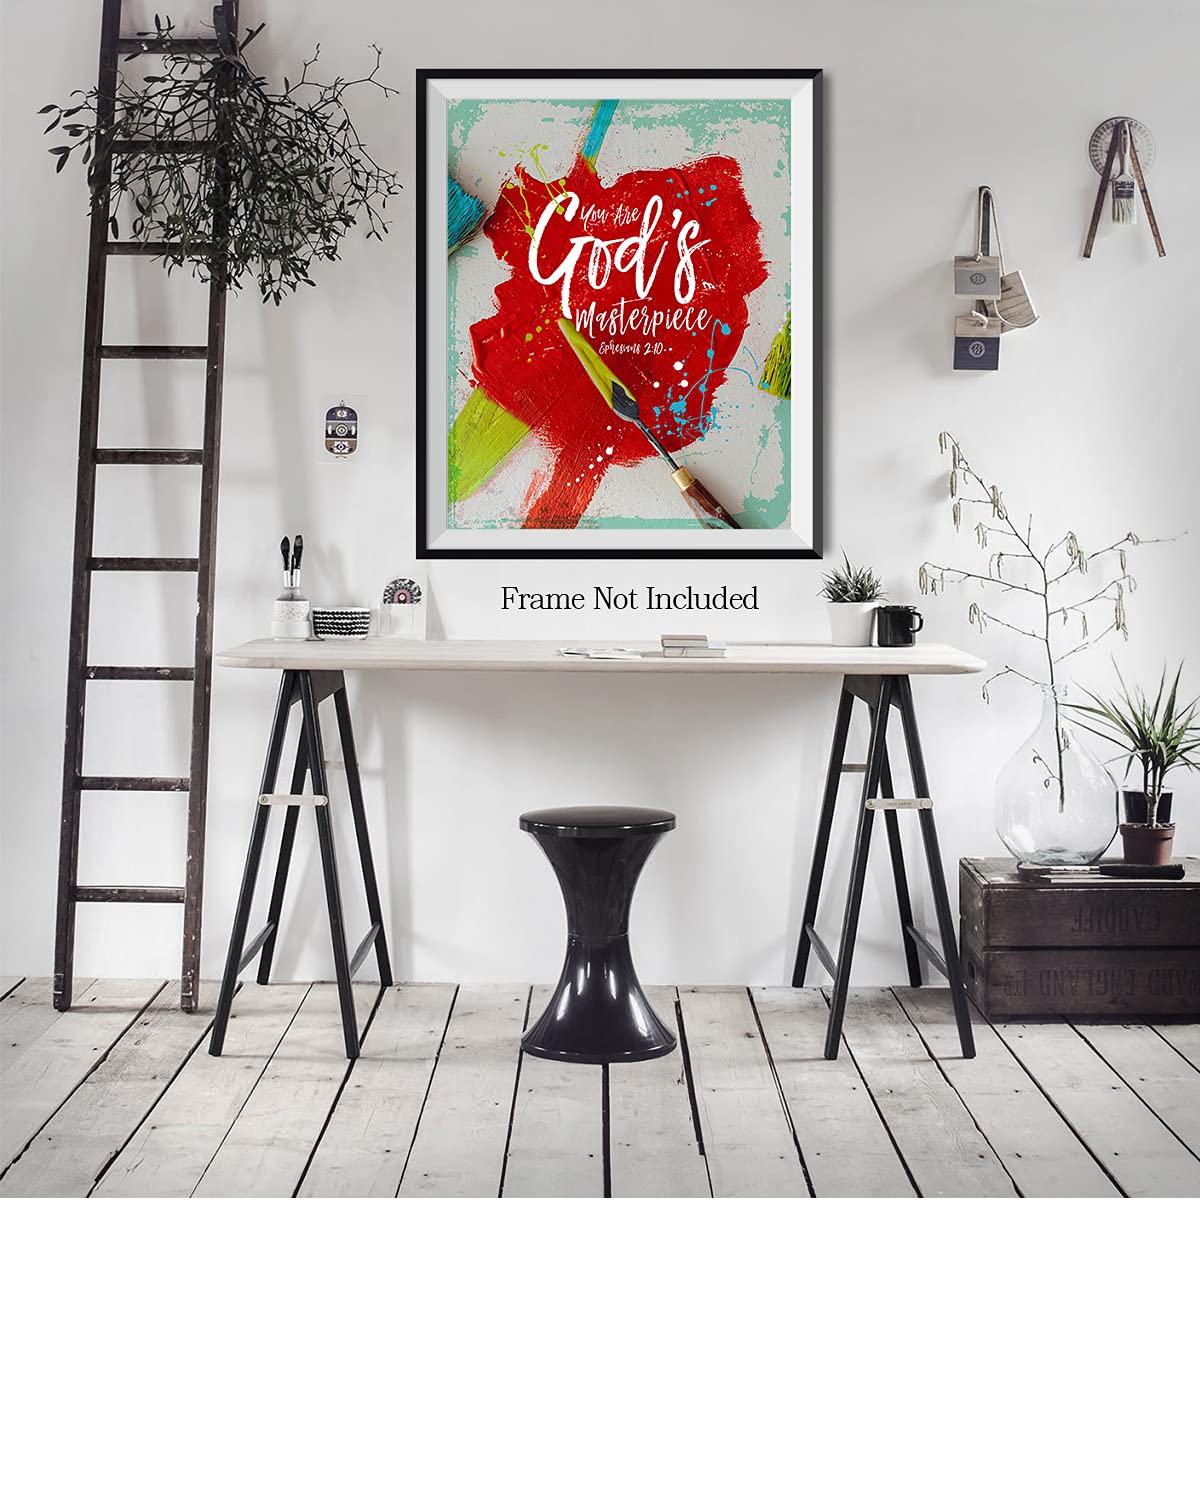 You Are God's Masterpiece (Ephesians 2:10)- Religious Wall Art Decorwith a light gray background